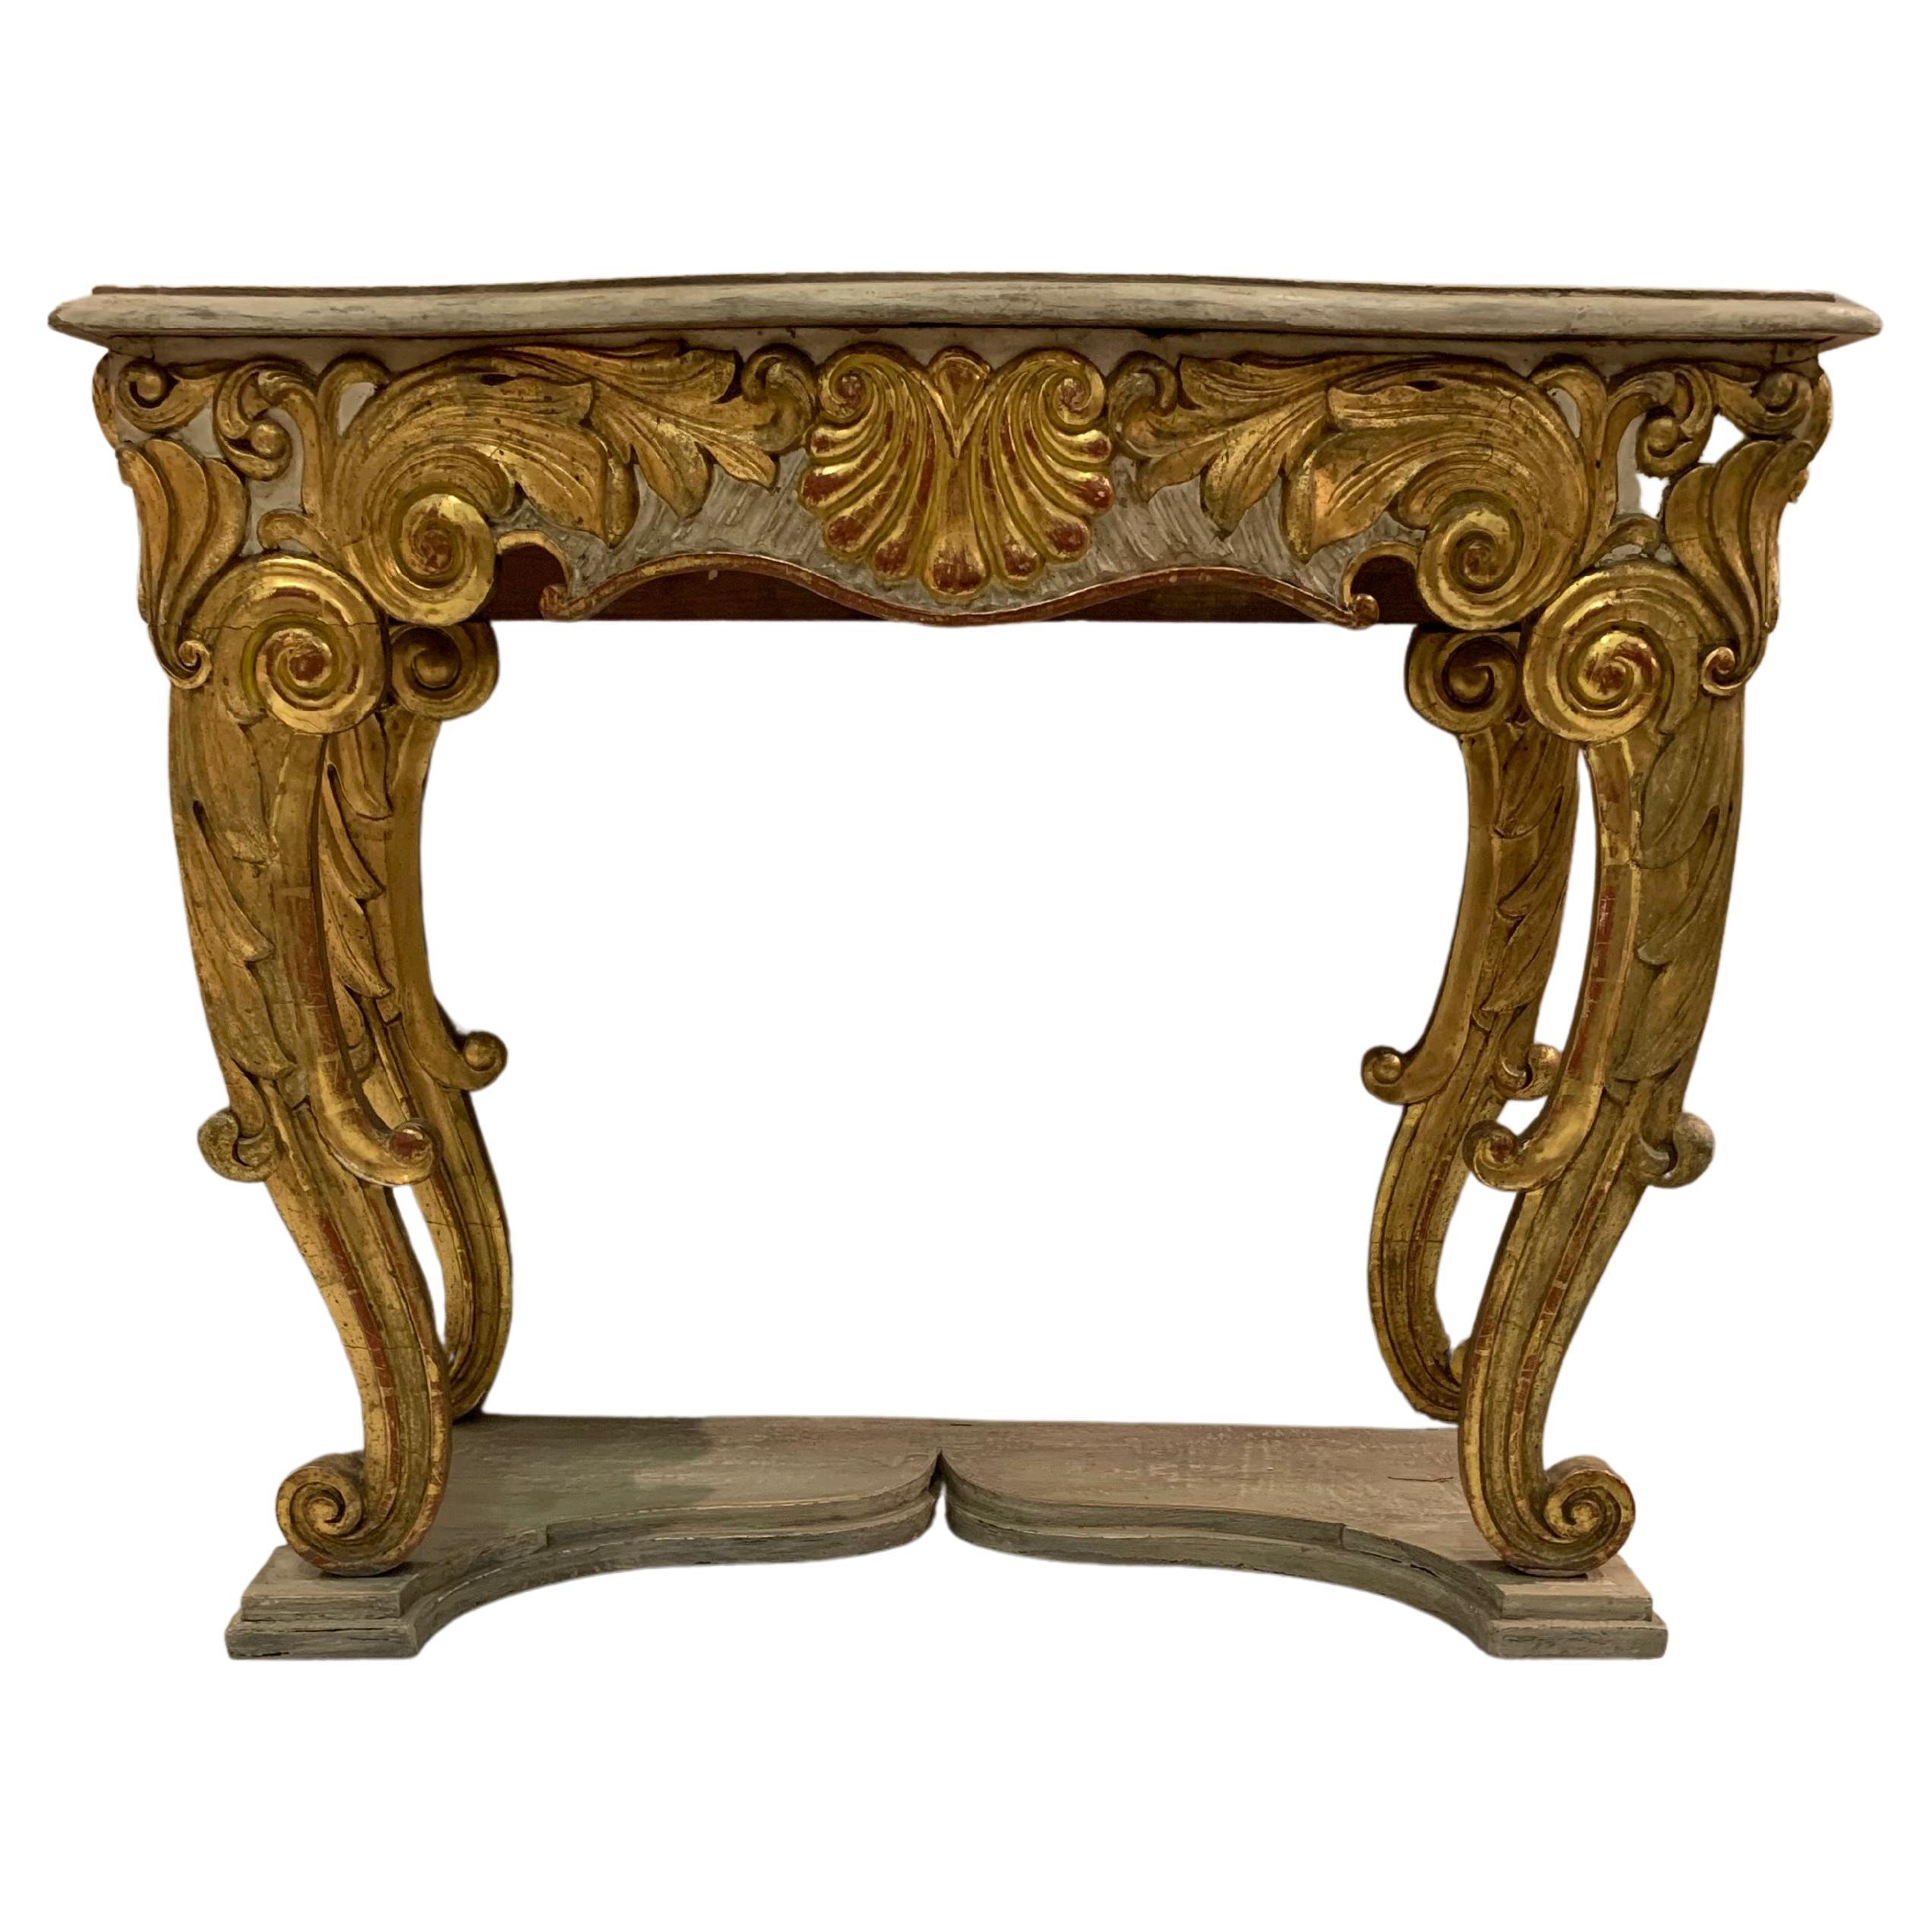 C19th Swedish Rococo Console with Gilded & Painted Shells & Scroll Decoration